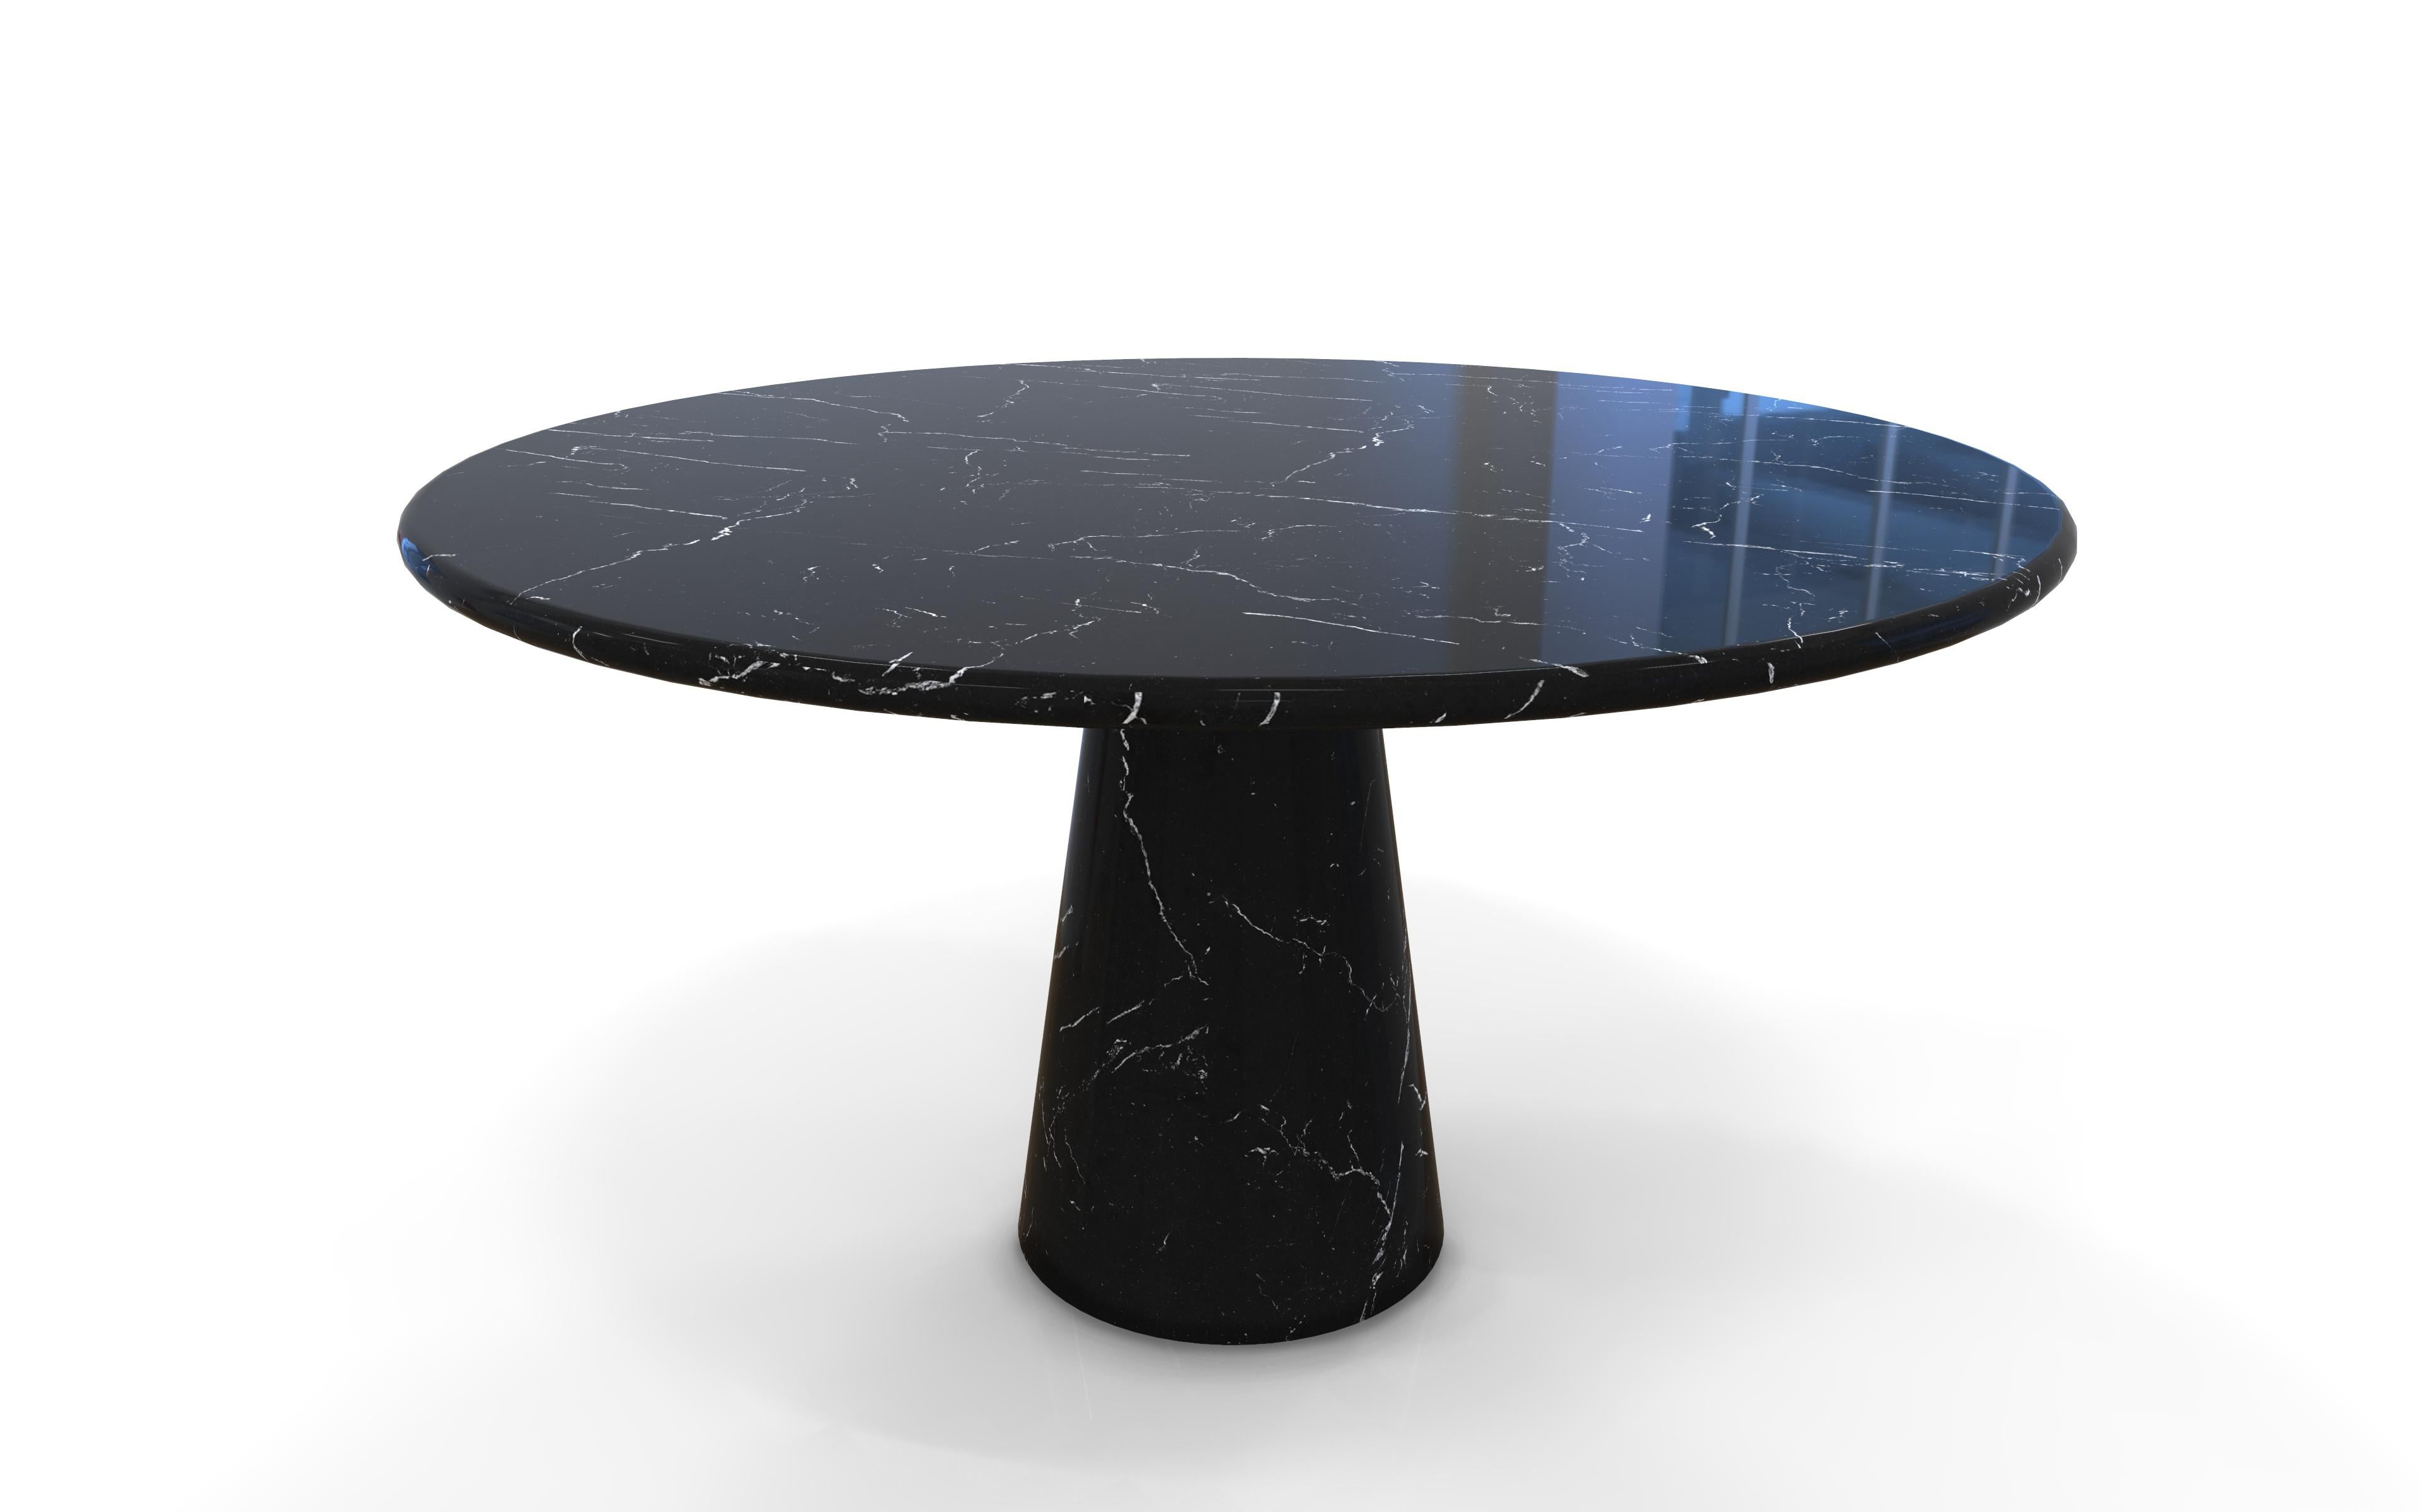 Name: Colonnata
Round marble table with conical base. The travertine version has a base with a textured finish and a polished surface
Size: Diameter 130 x height 72
Materials: White Carrara, Black Marquina, White Pennsylvania, National